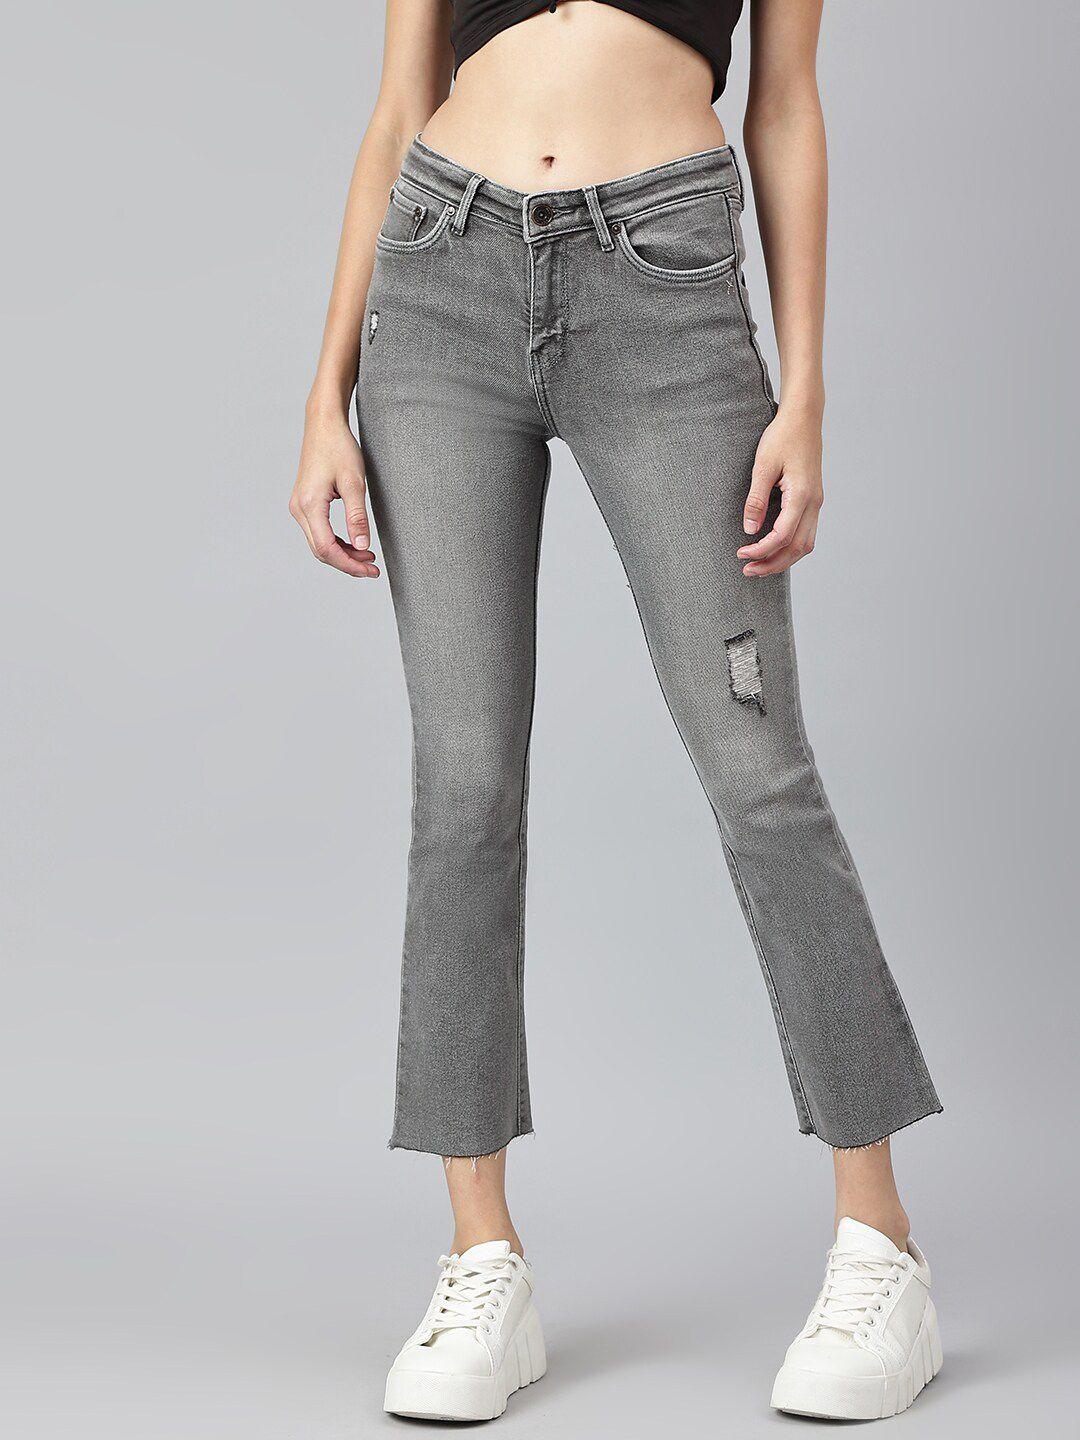 xpose-women-grey-comfort-bootcut-high-rise-low-distress-light-fade-stretchable-jeans